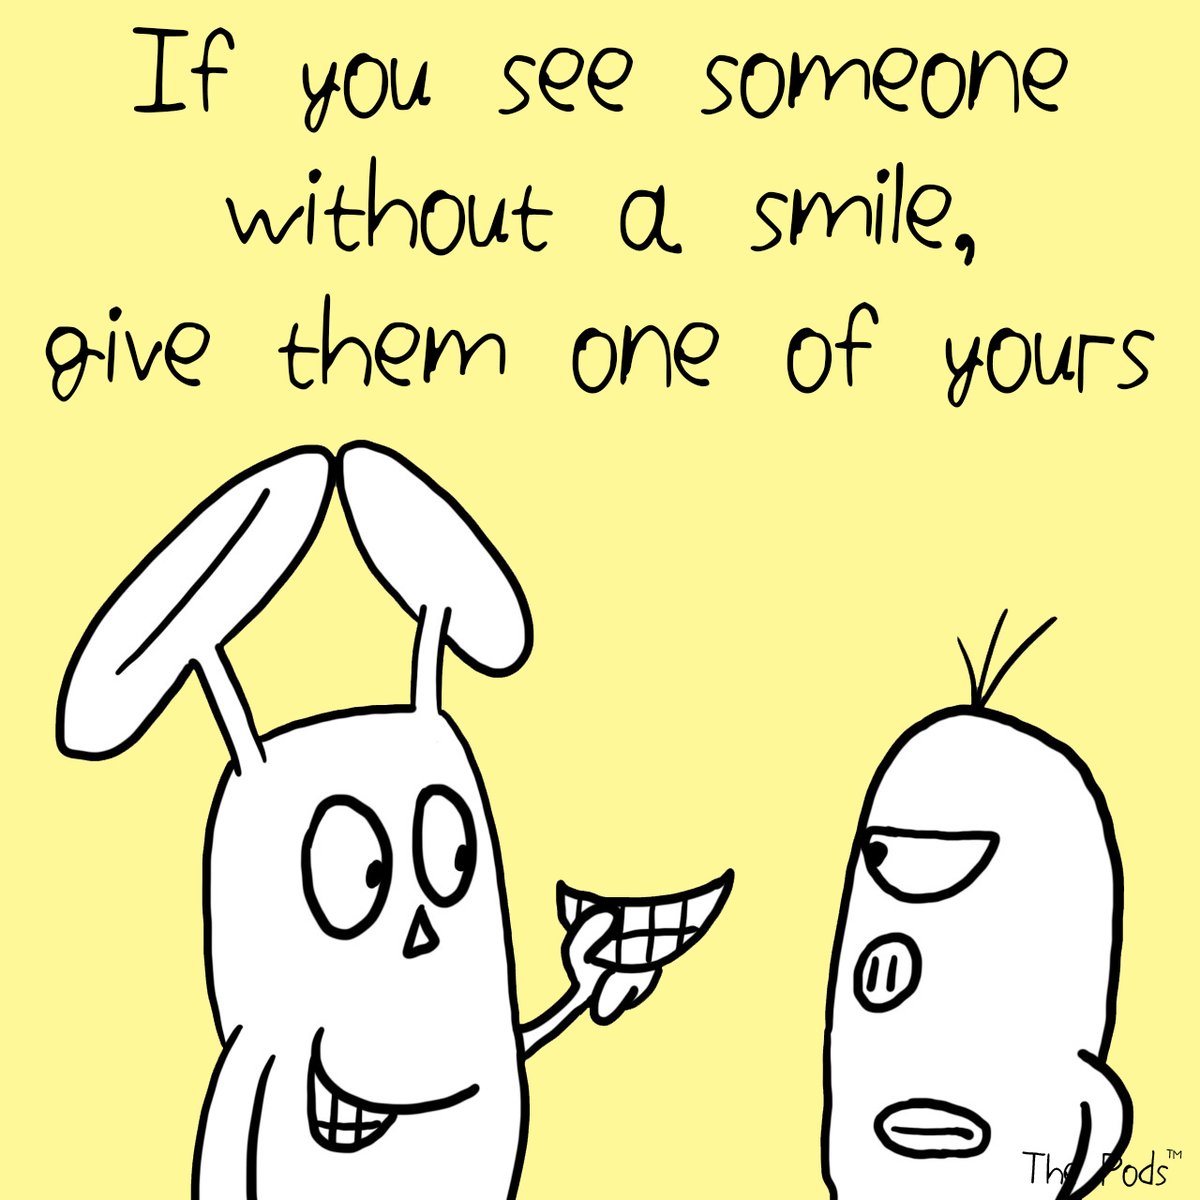 Look after one another...
#happiness #happy
#smile #makesomeonesmile #lookafteroneanother #meetthepods #thepods #bunnypod #grumpypod #smiling #behappy #makesomeonehappy #lookafteroneanother #autism #autisticartist #specialneeds